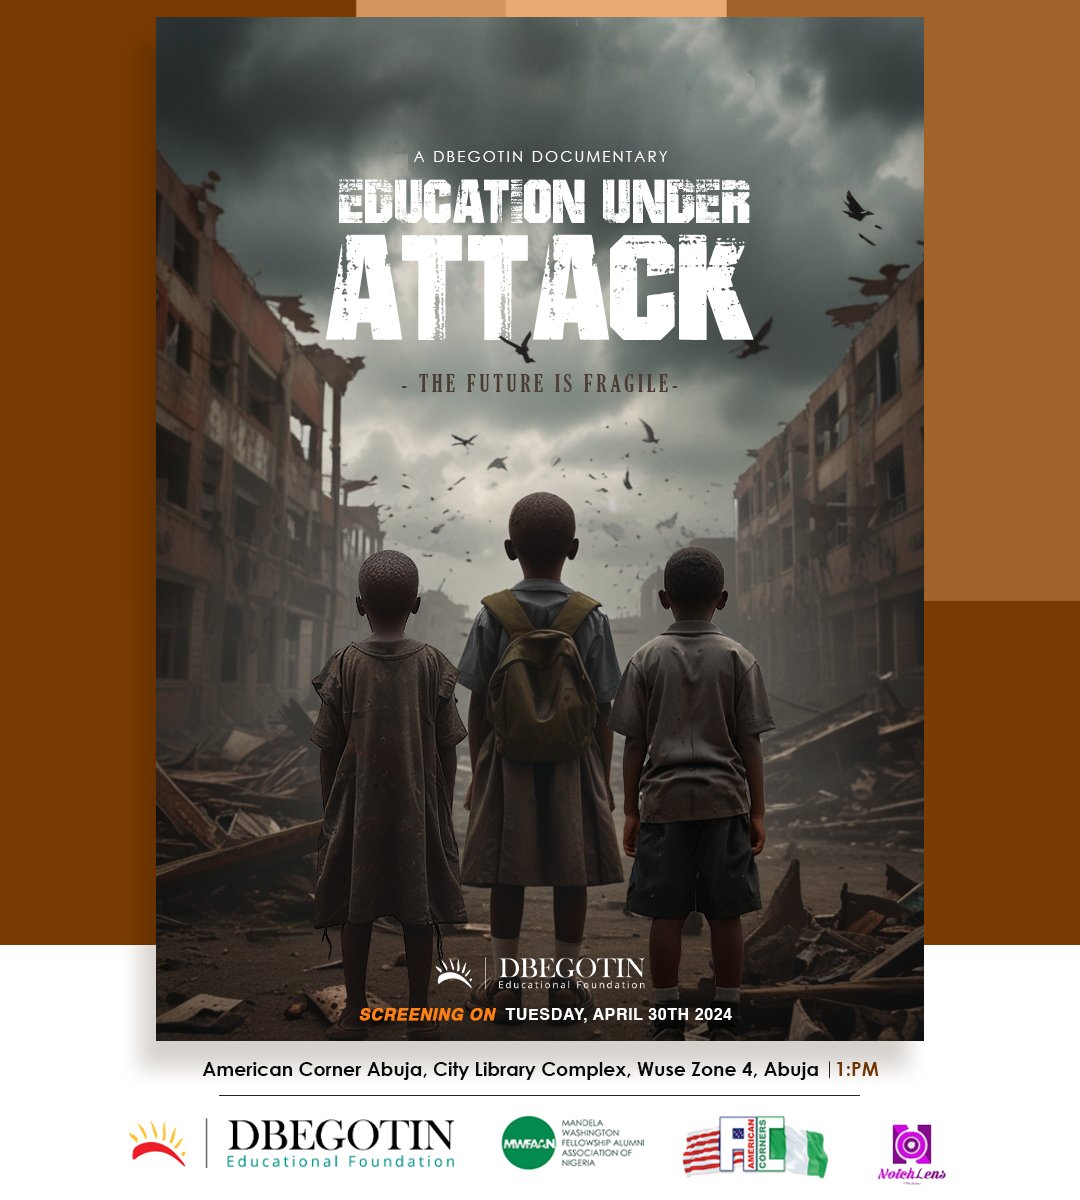 You're invited to the premiere screening of our documentary 'Education Under Attack' 

Date: Tuesday, April 30th, 2024 
Time: 1 PM
Venue: American Corner Abuja, City Library Complex, Wuse Zone 4, Abuja.

1/3